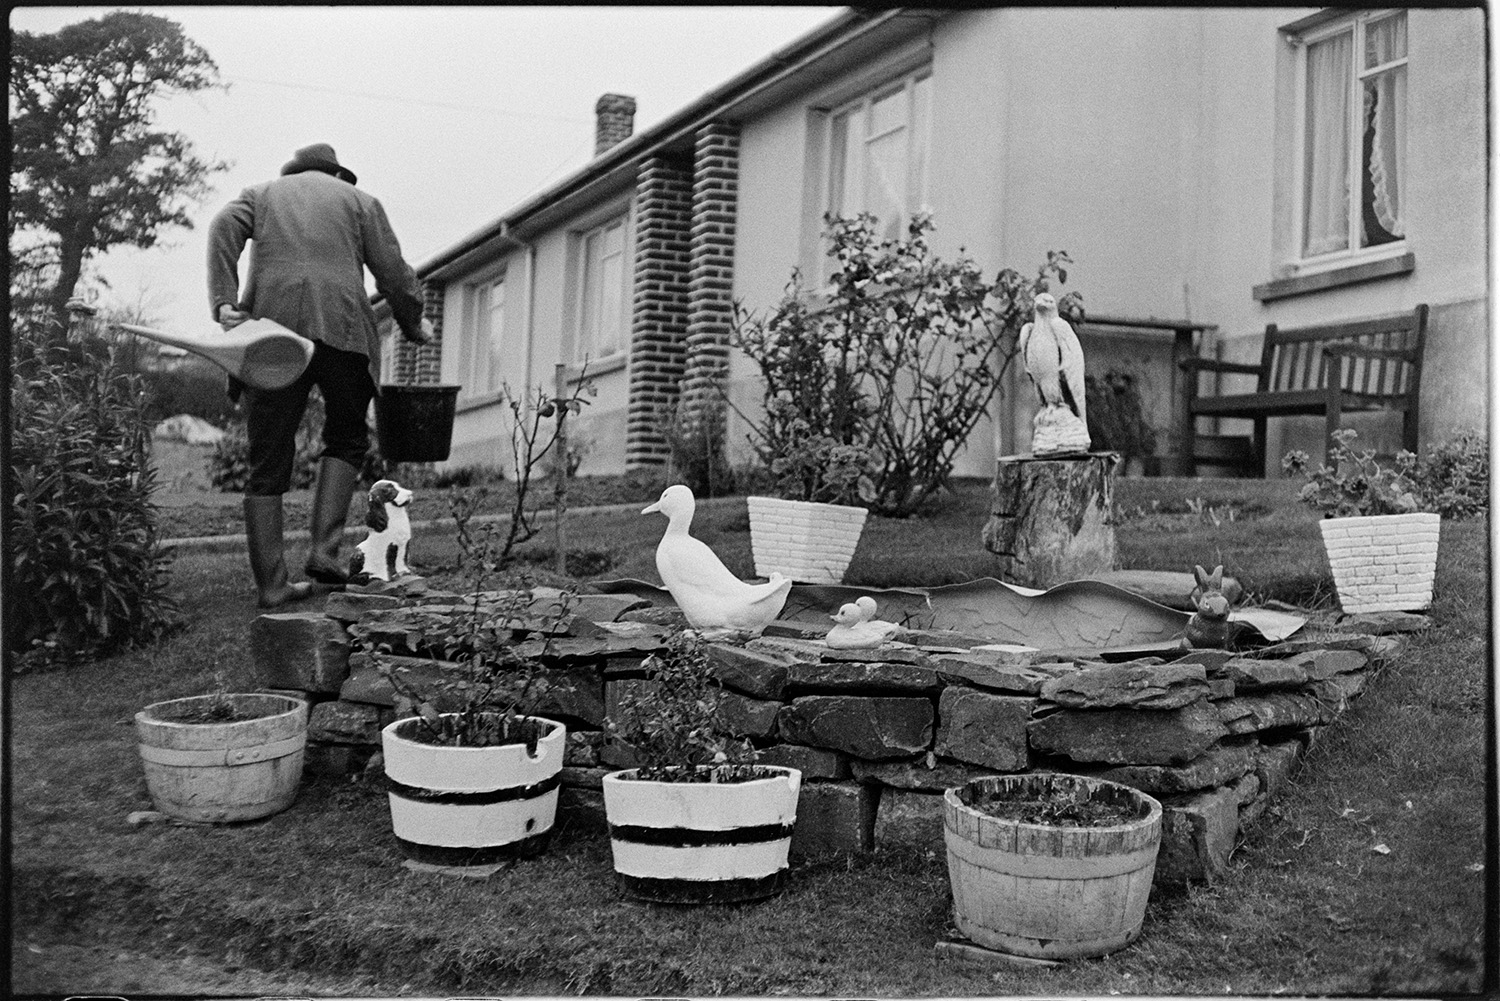 Ornamental garden with duck and dog, real dogs too! 
[Sidney Bryant holding a bucket and watering can in his garden in Merton. In the foreground is a small walled pond with garden ornaments, including a duck, squirrel and dog, and plants in pots of barrels.]